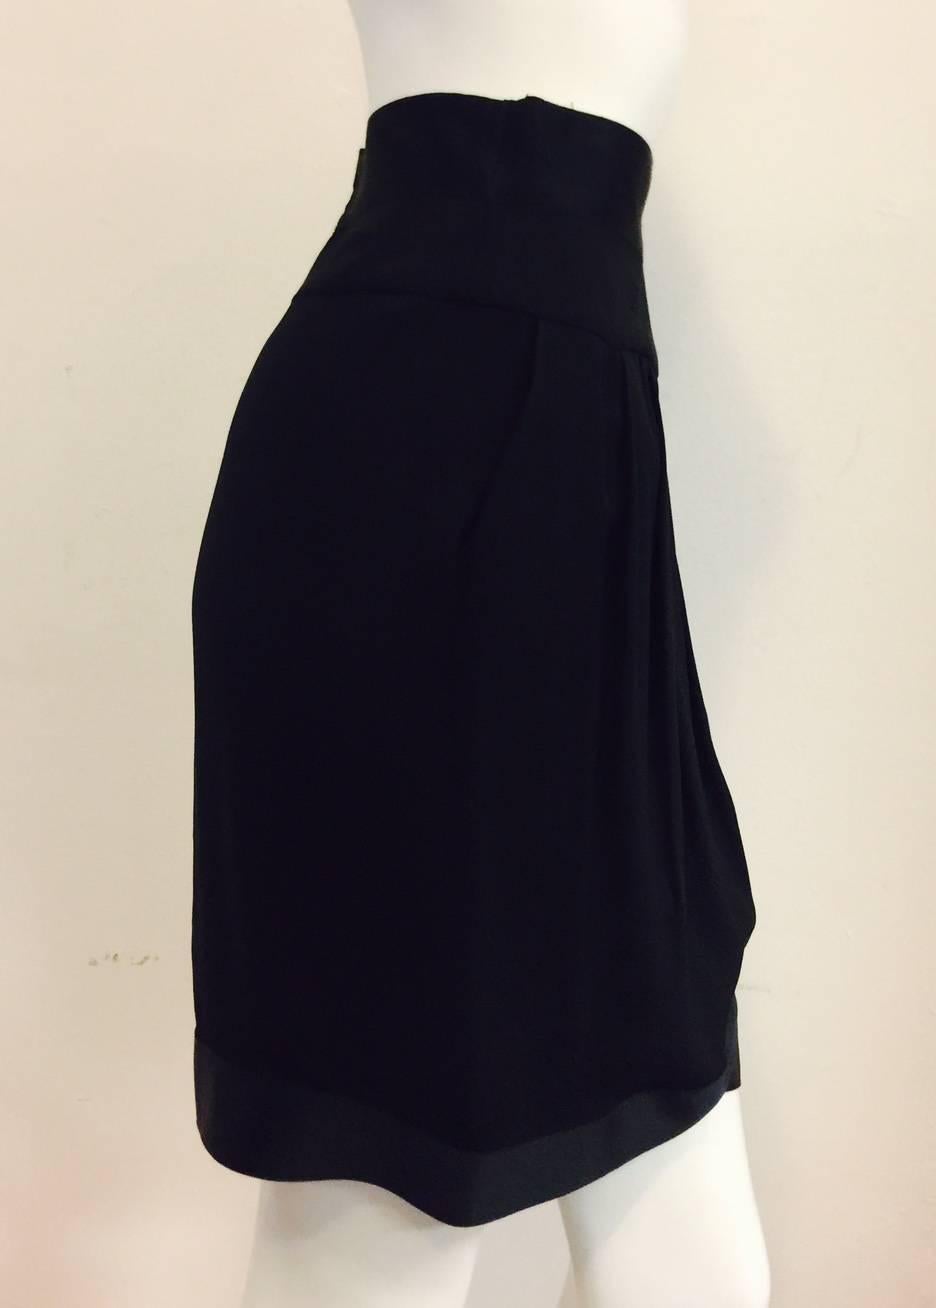 Women's Chanel Boutique Black Silk Evening Skirt With Silk Satin Banded Trim